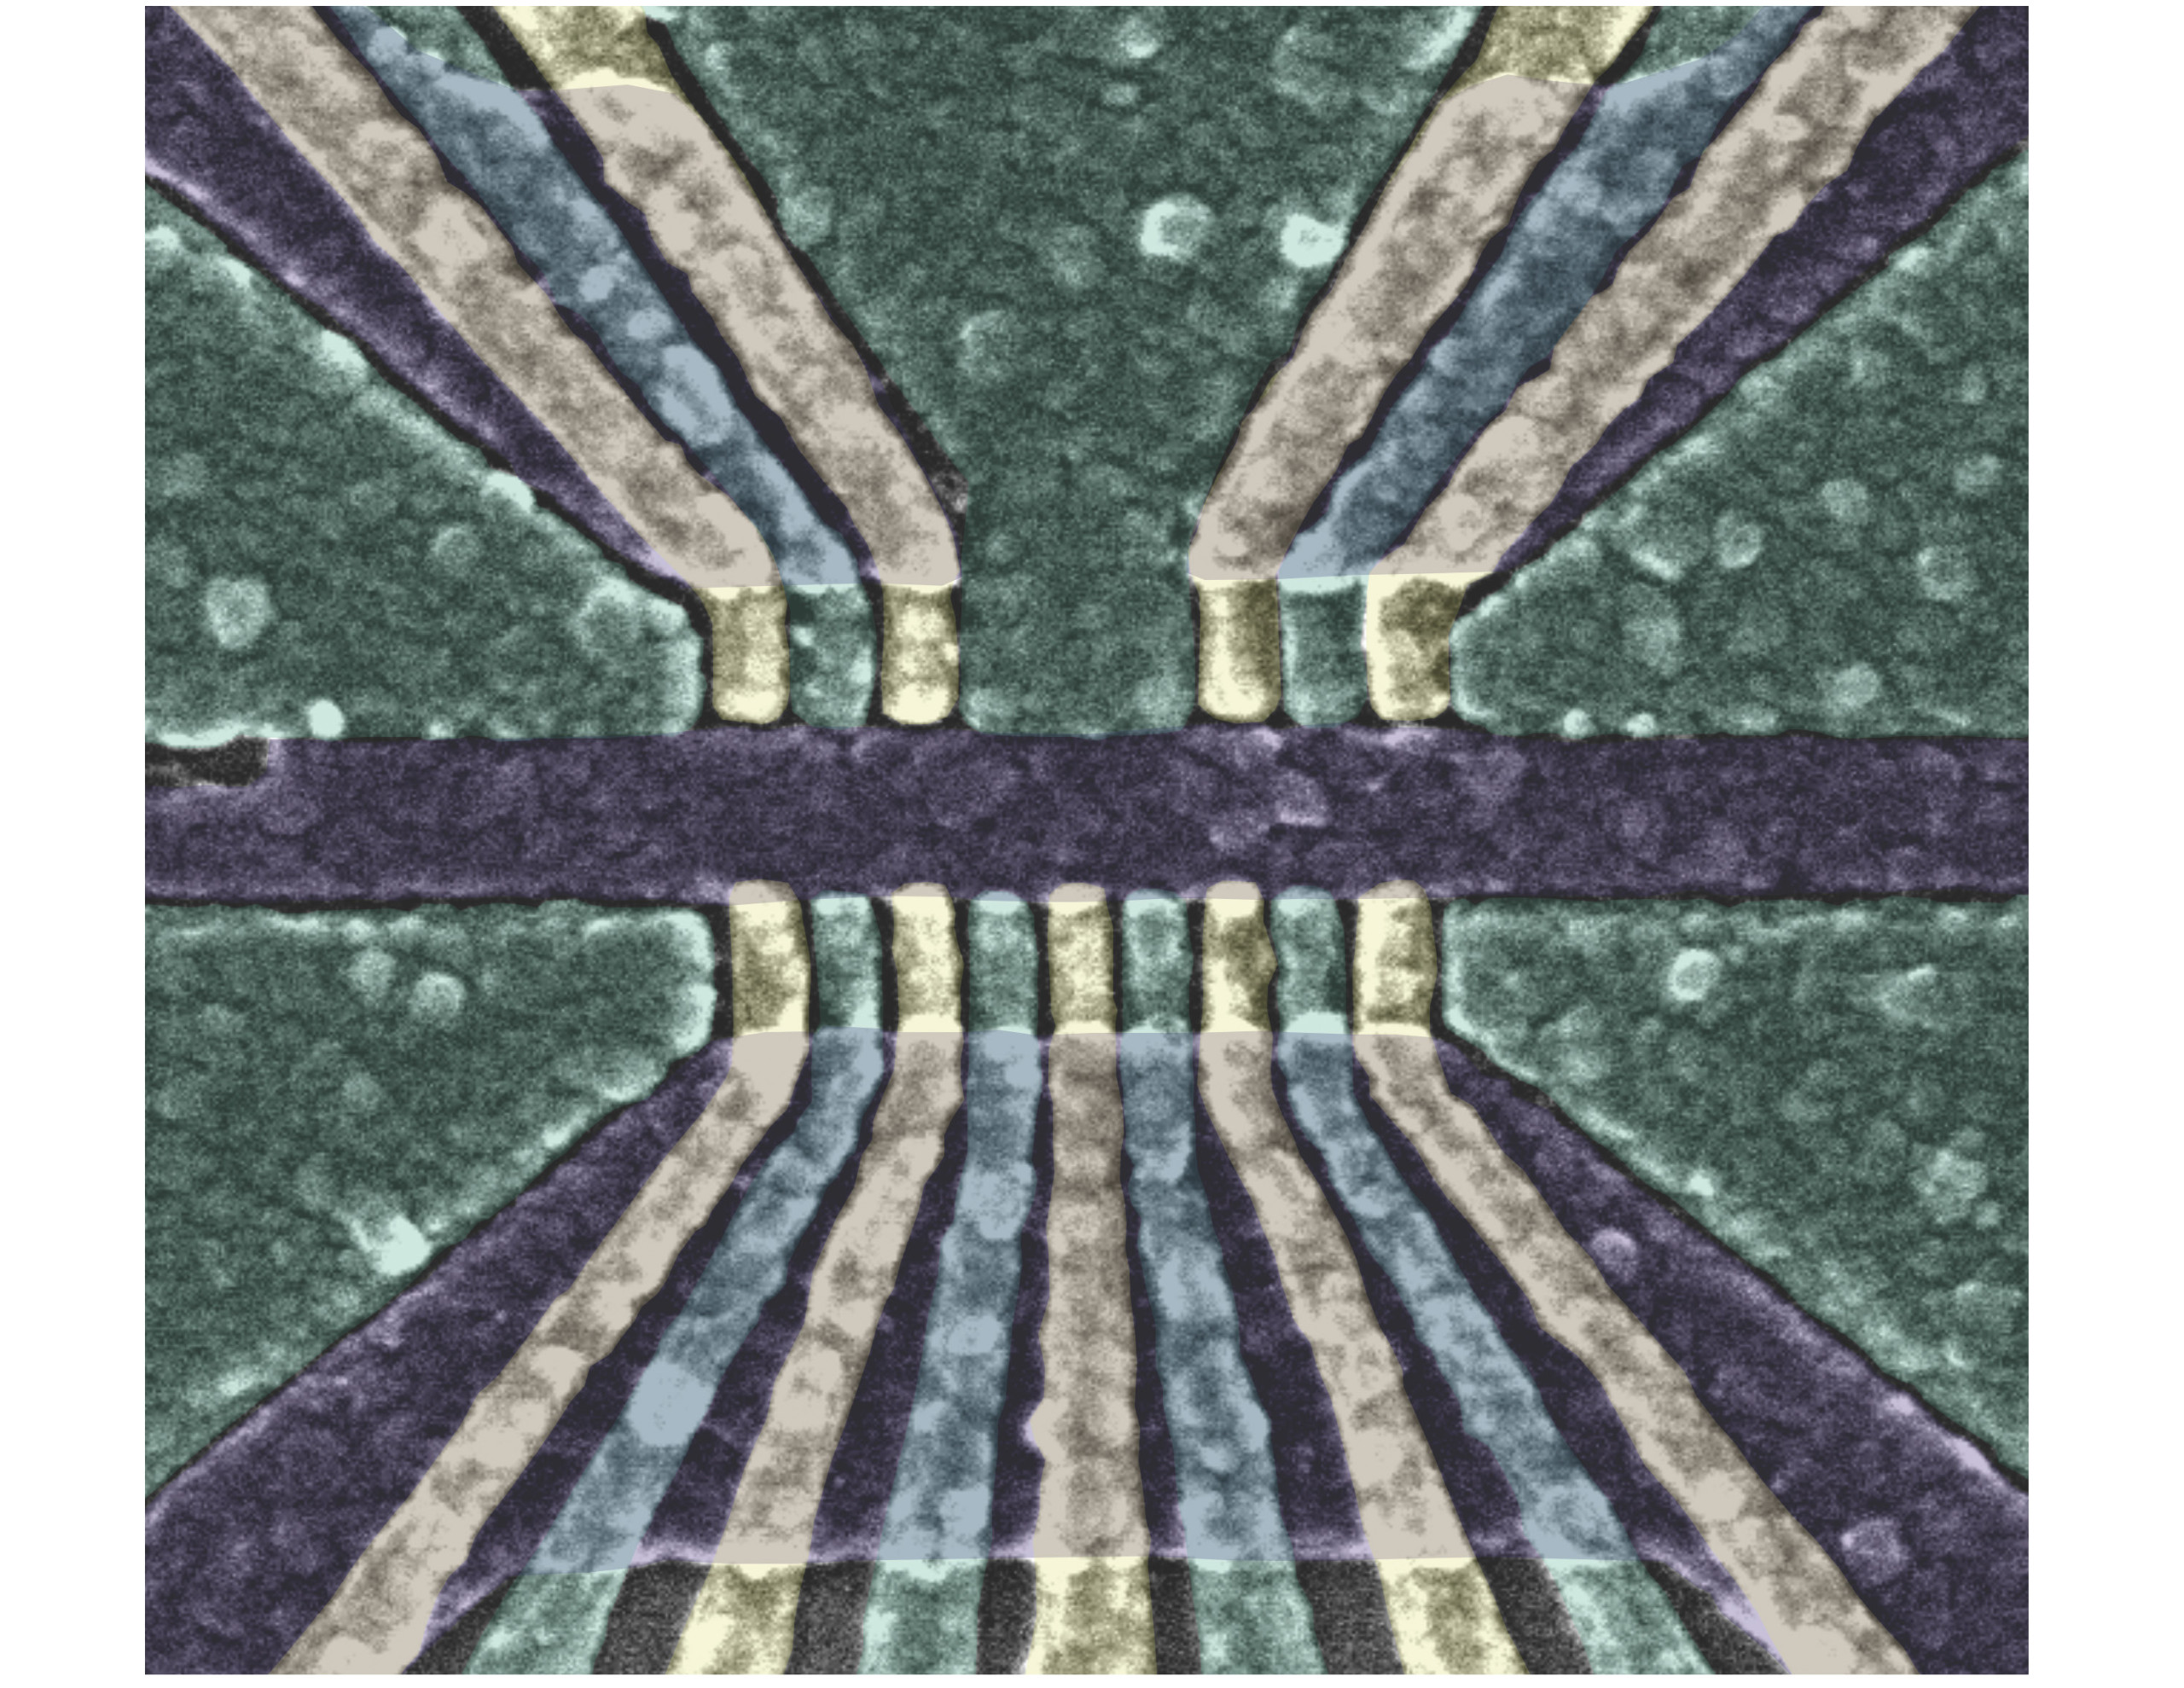 A false-color scanning electron micrograph of the qubit structure used in this study.  The area imaged is approximately 1,500 nanometers in diameter.  For comparison, a human hair is between 50,000 and 100,000 nanometers wide.